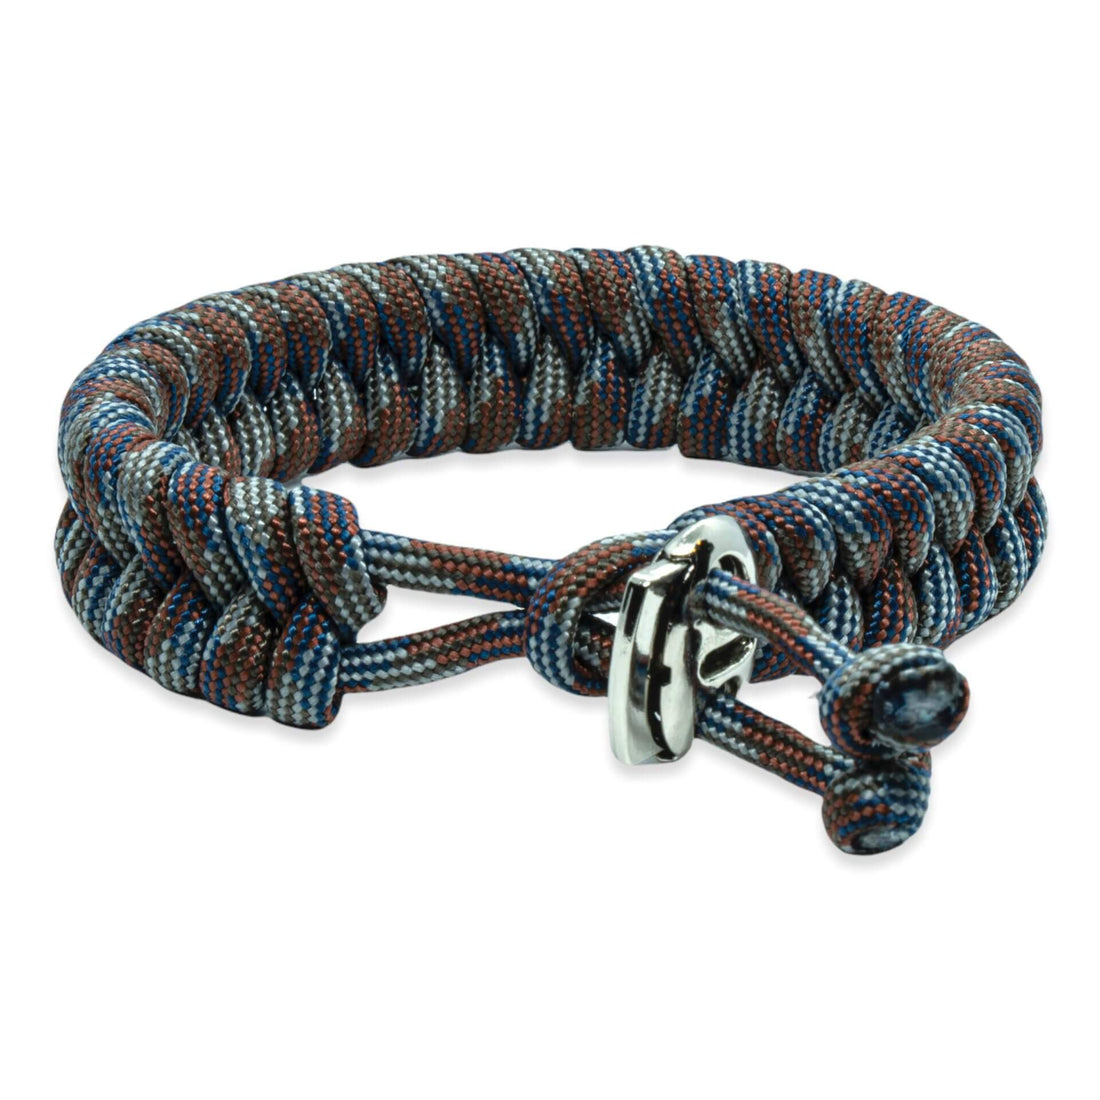 Swedish Tail Bracelet - Brown Blue Gray Rope Colors